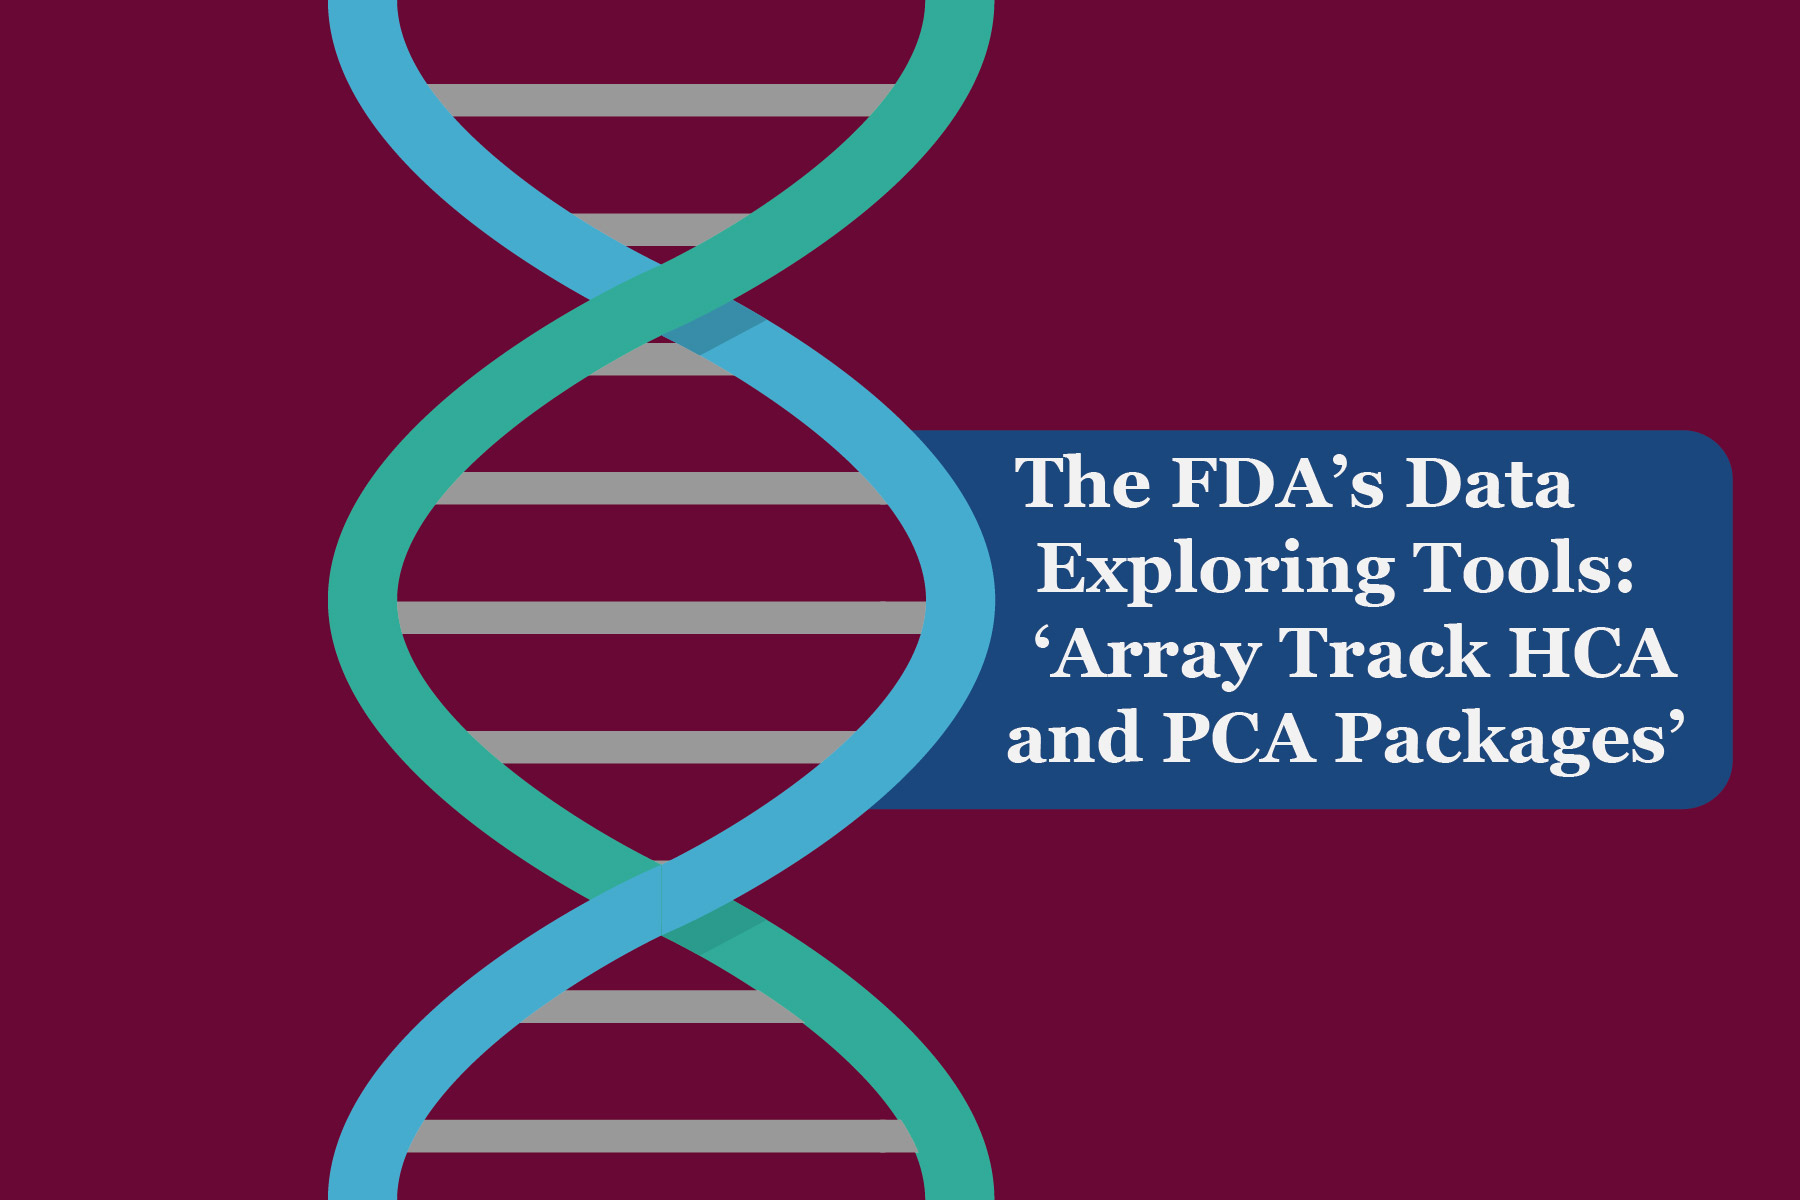 The FDA’s Data Exploring Tools: ‘Array Track HCA and PCA Packages’